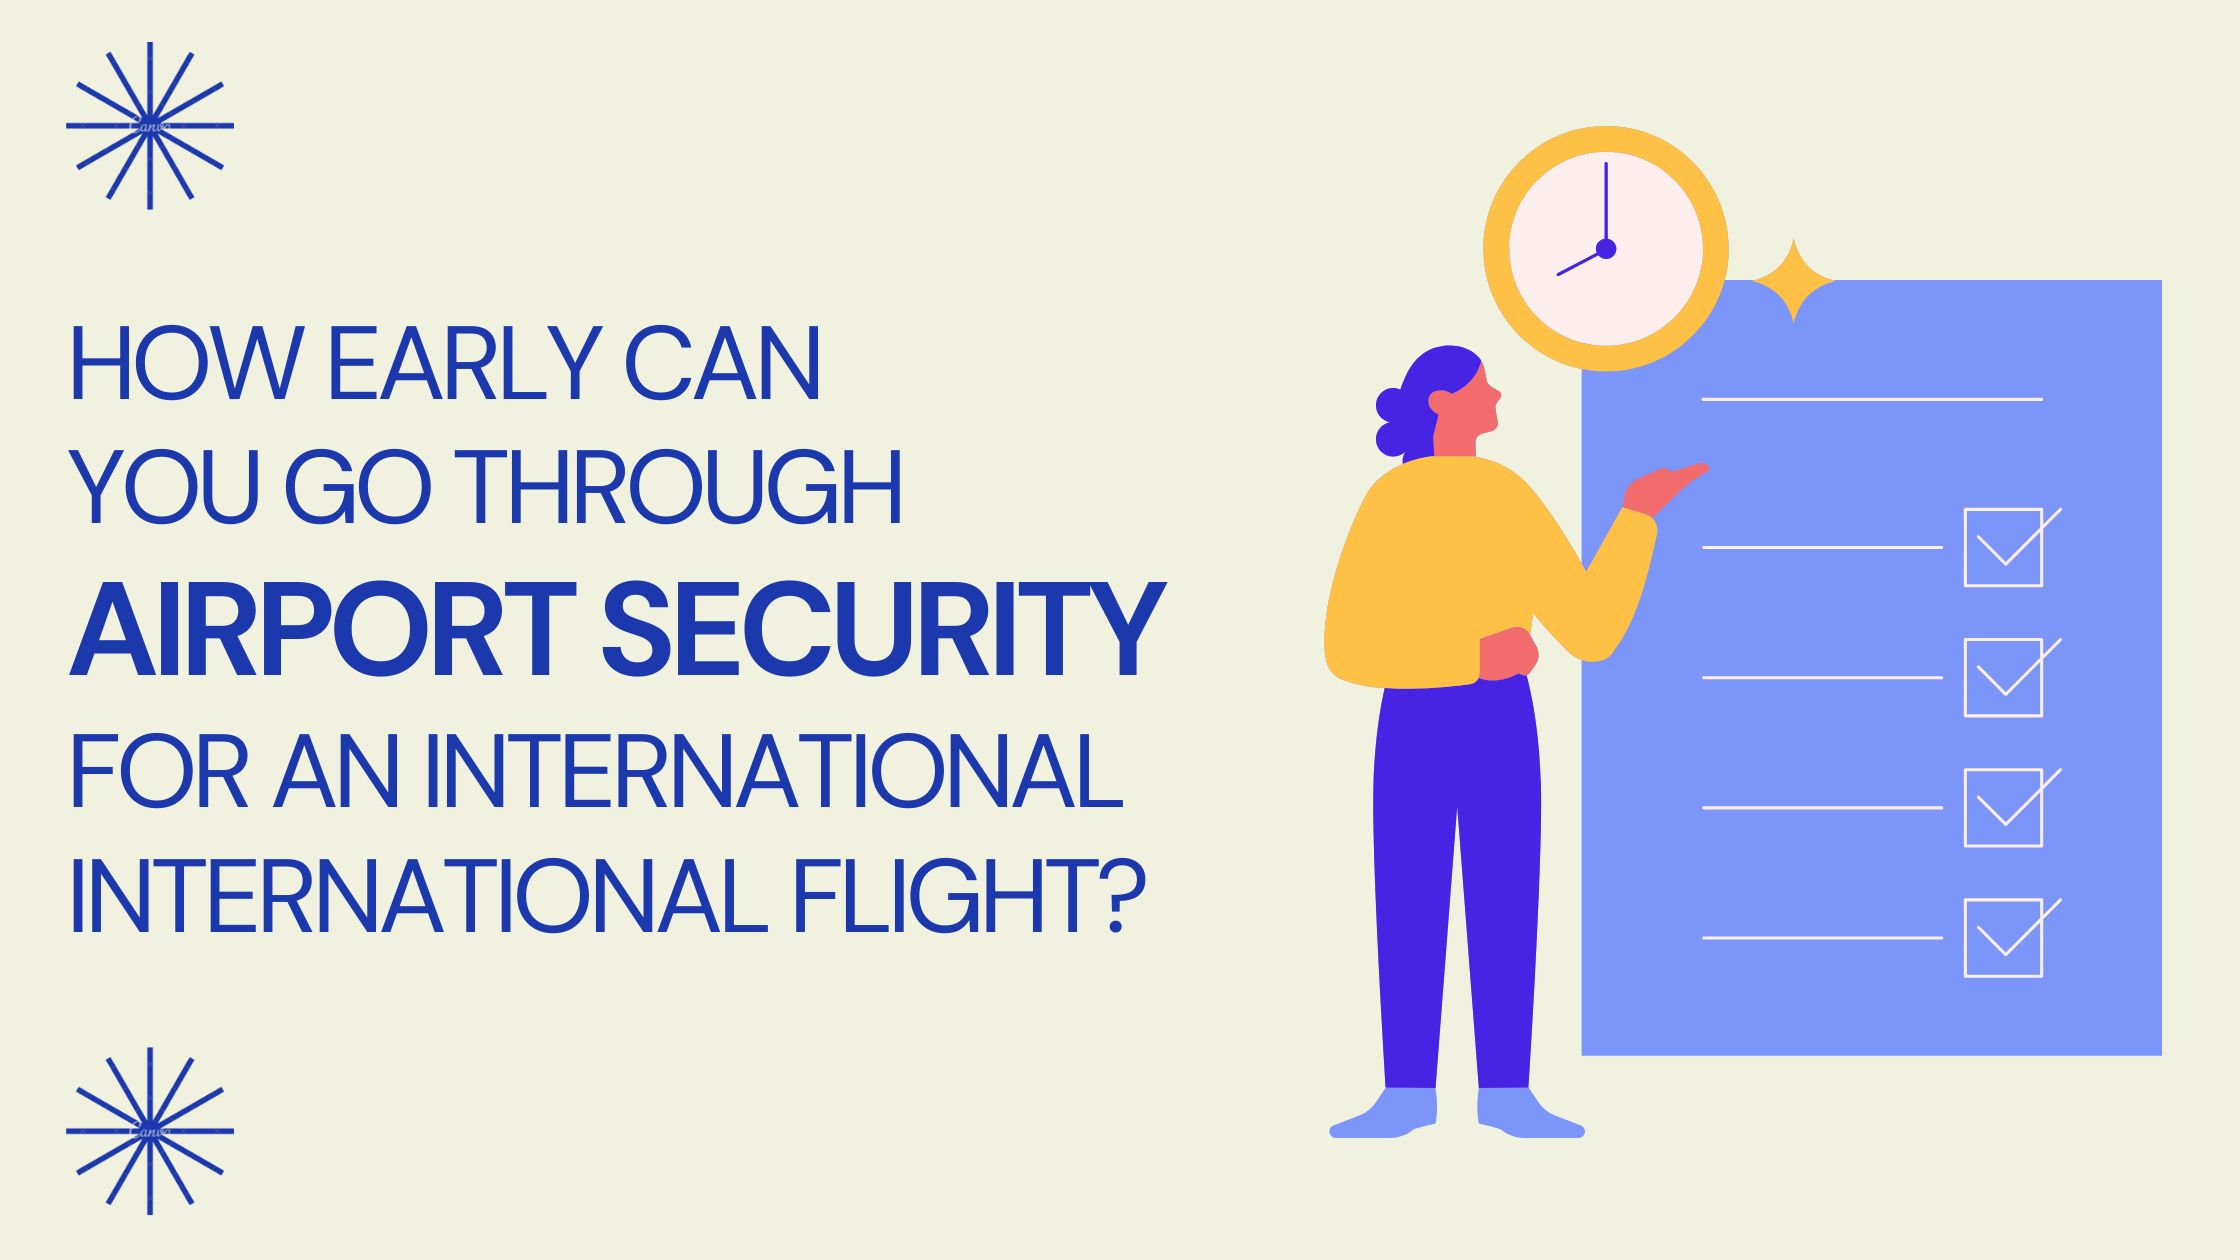 How Early Can You Go Through Airport Security For An International Flight